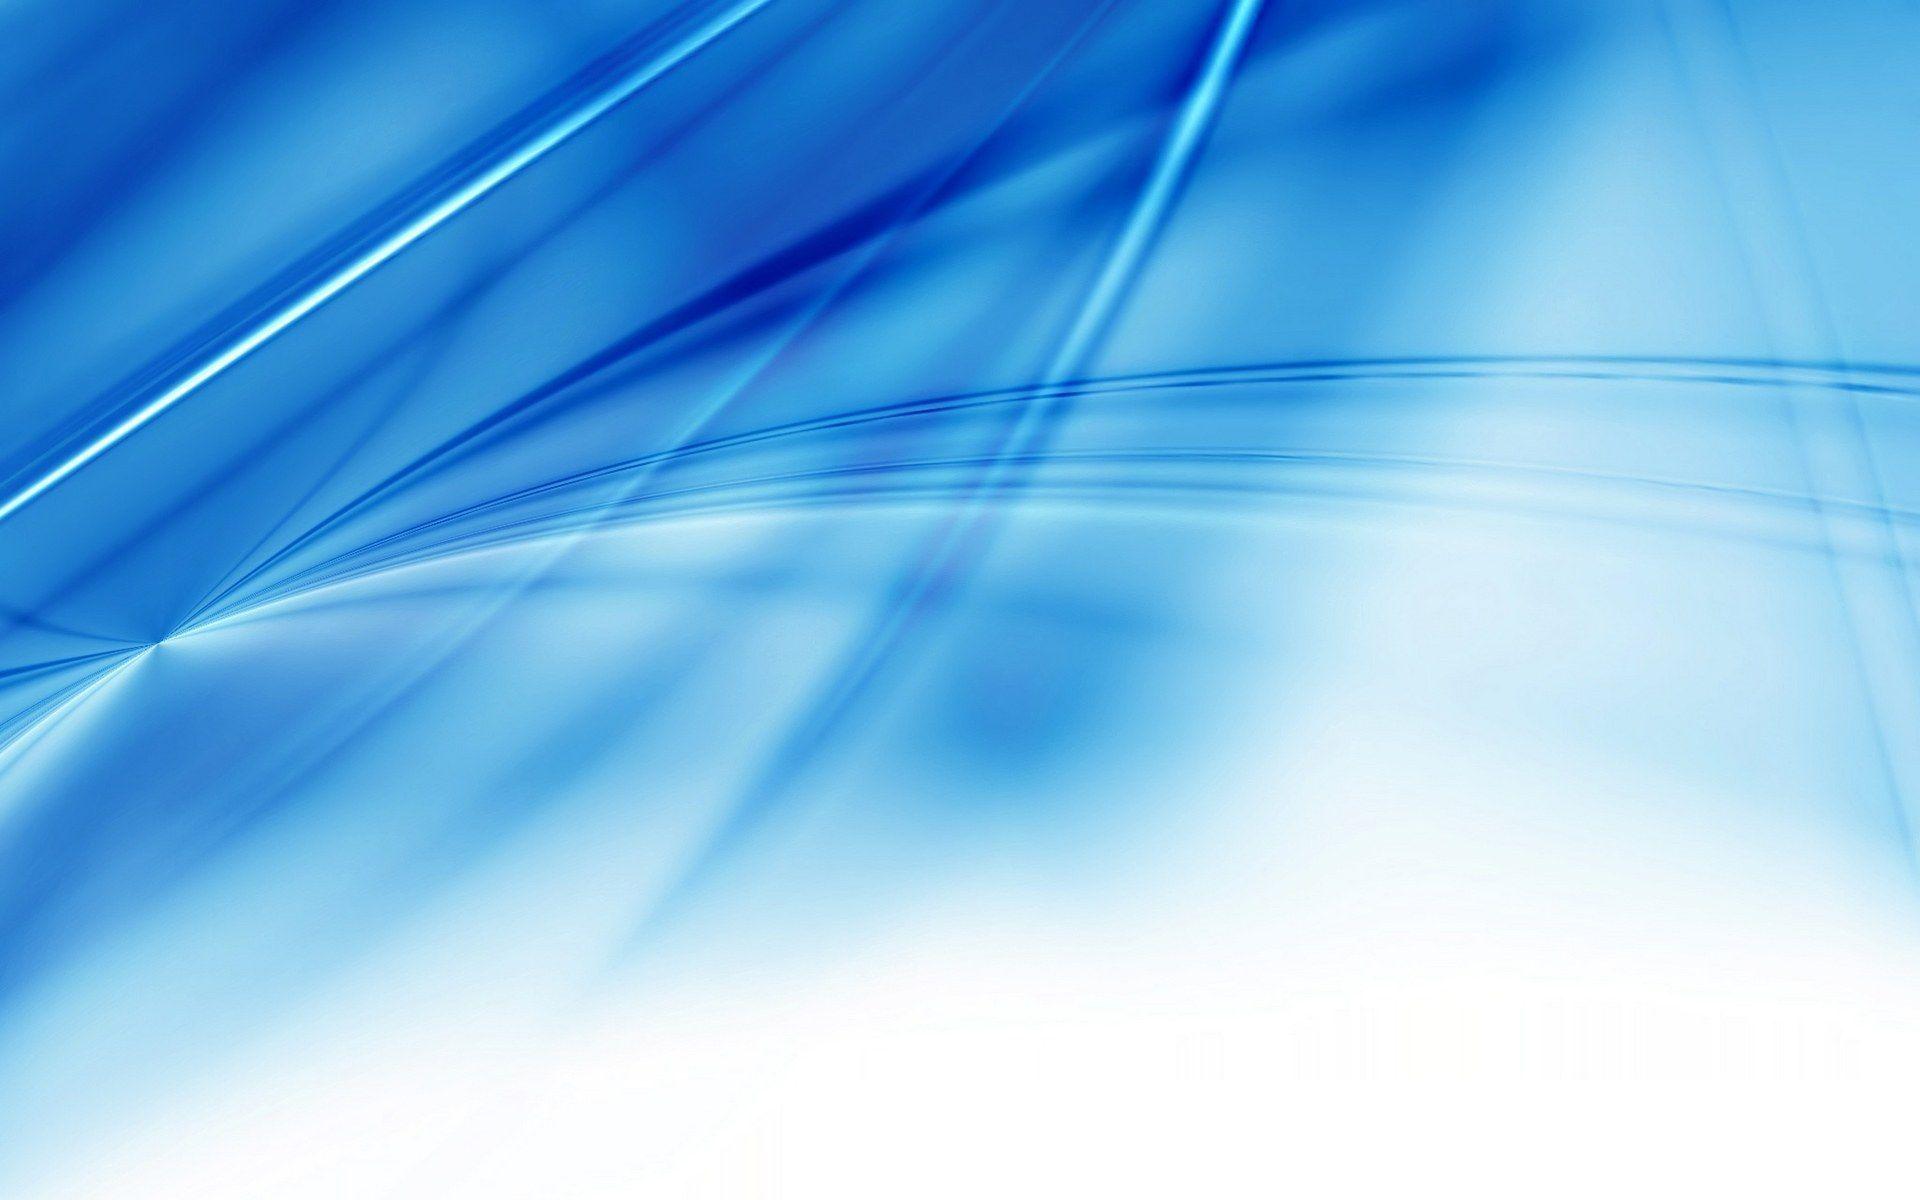 Blue and White Abstract Backgrounds HD Wallpapers in Abstract